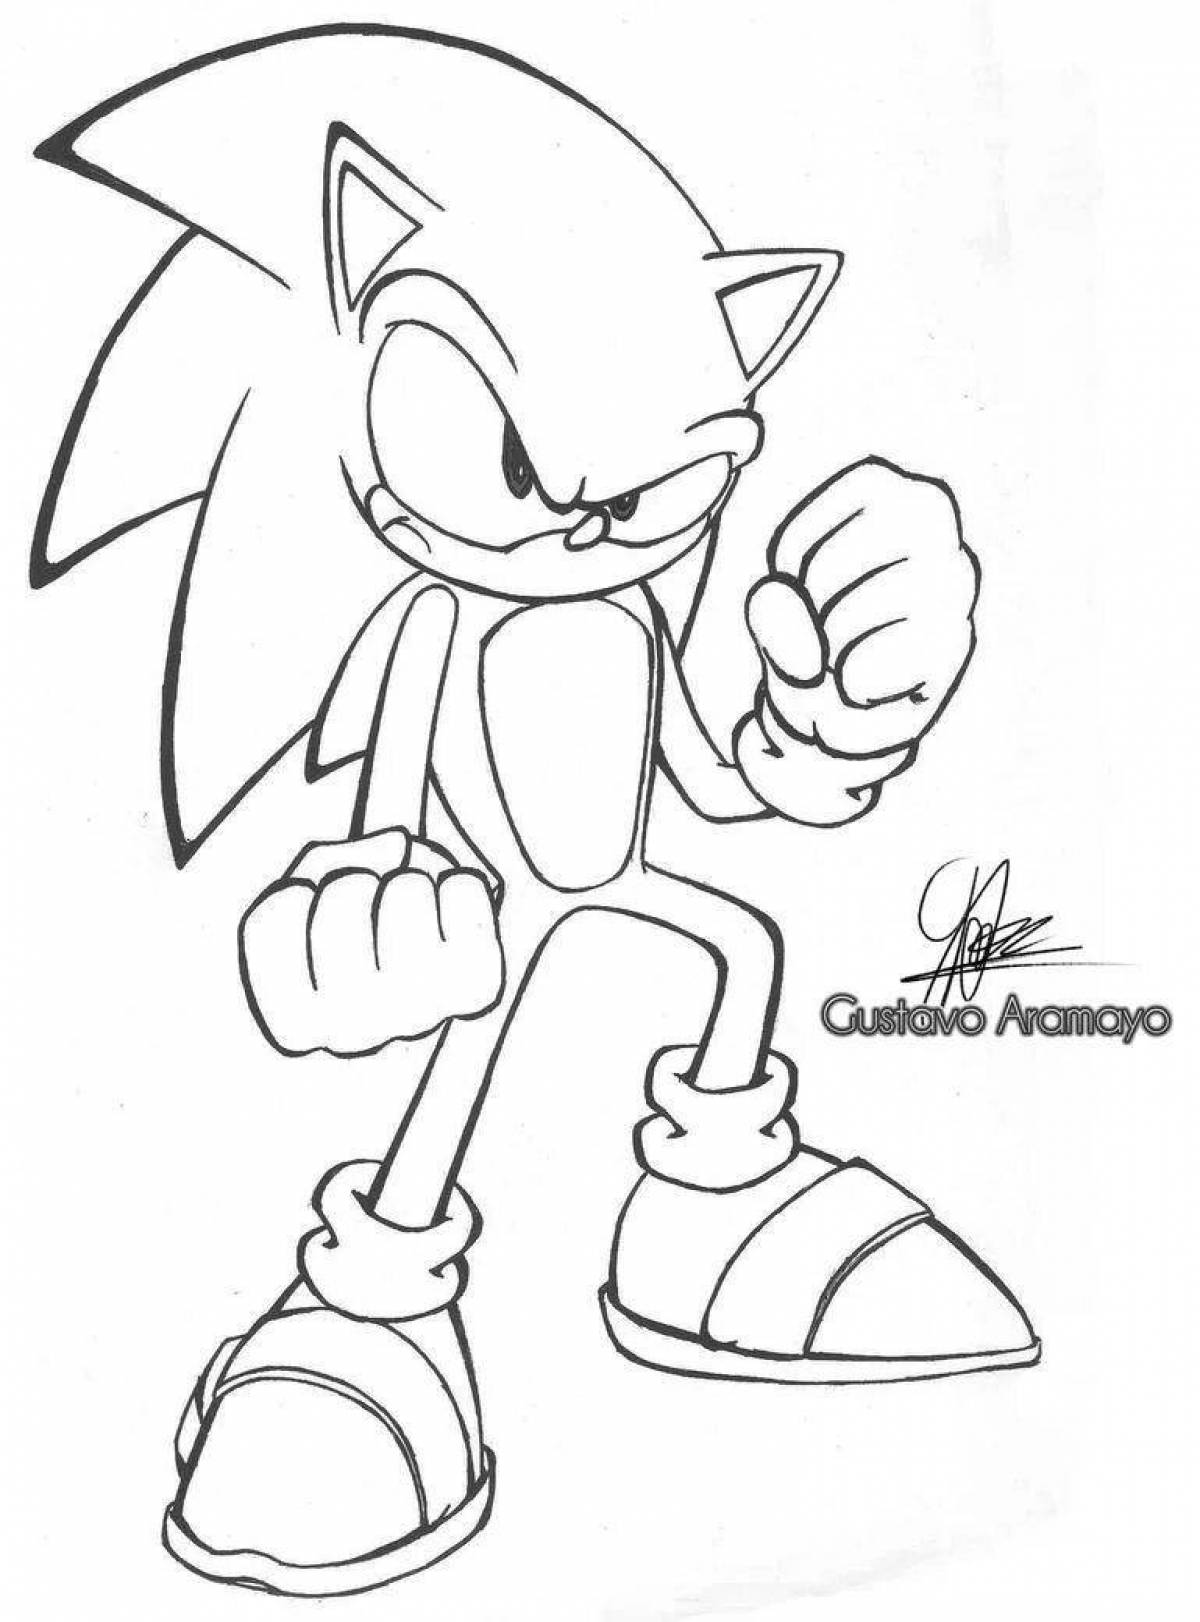 Creative sonic exe coloring book for kids